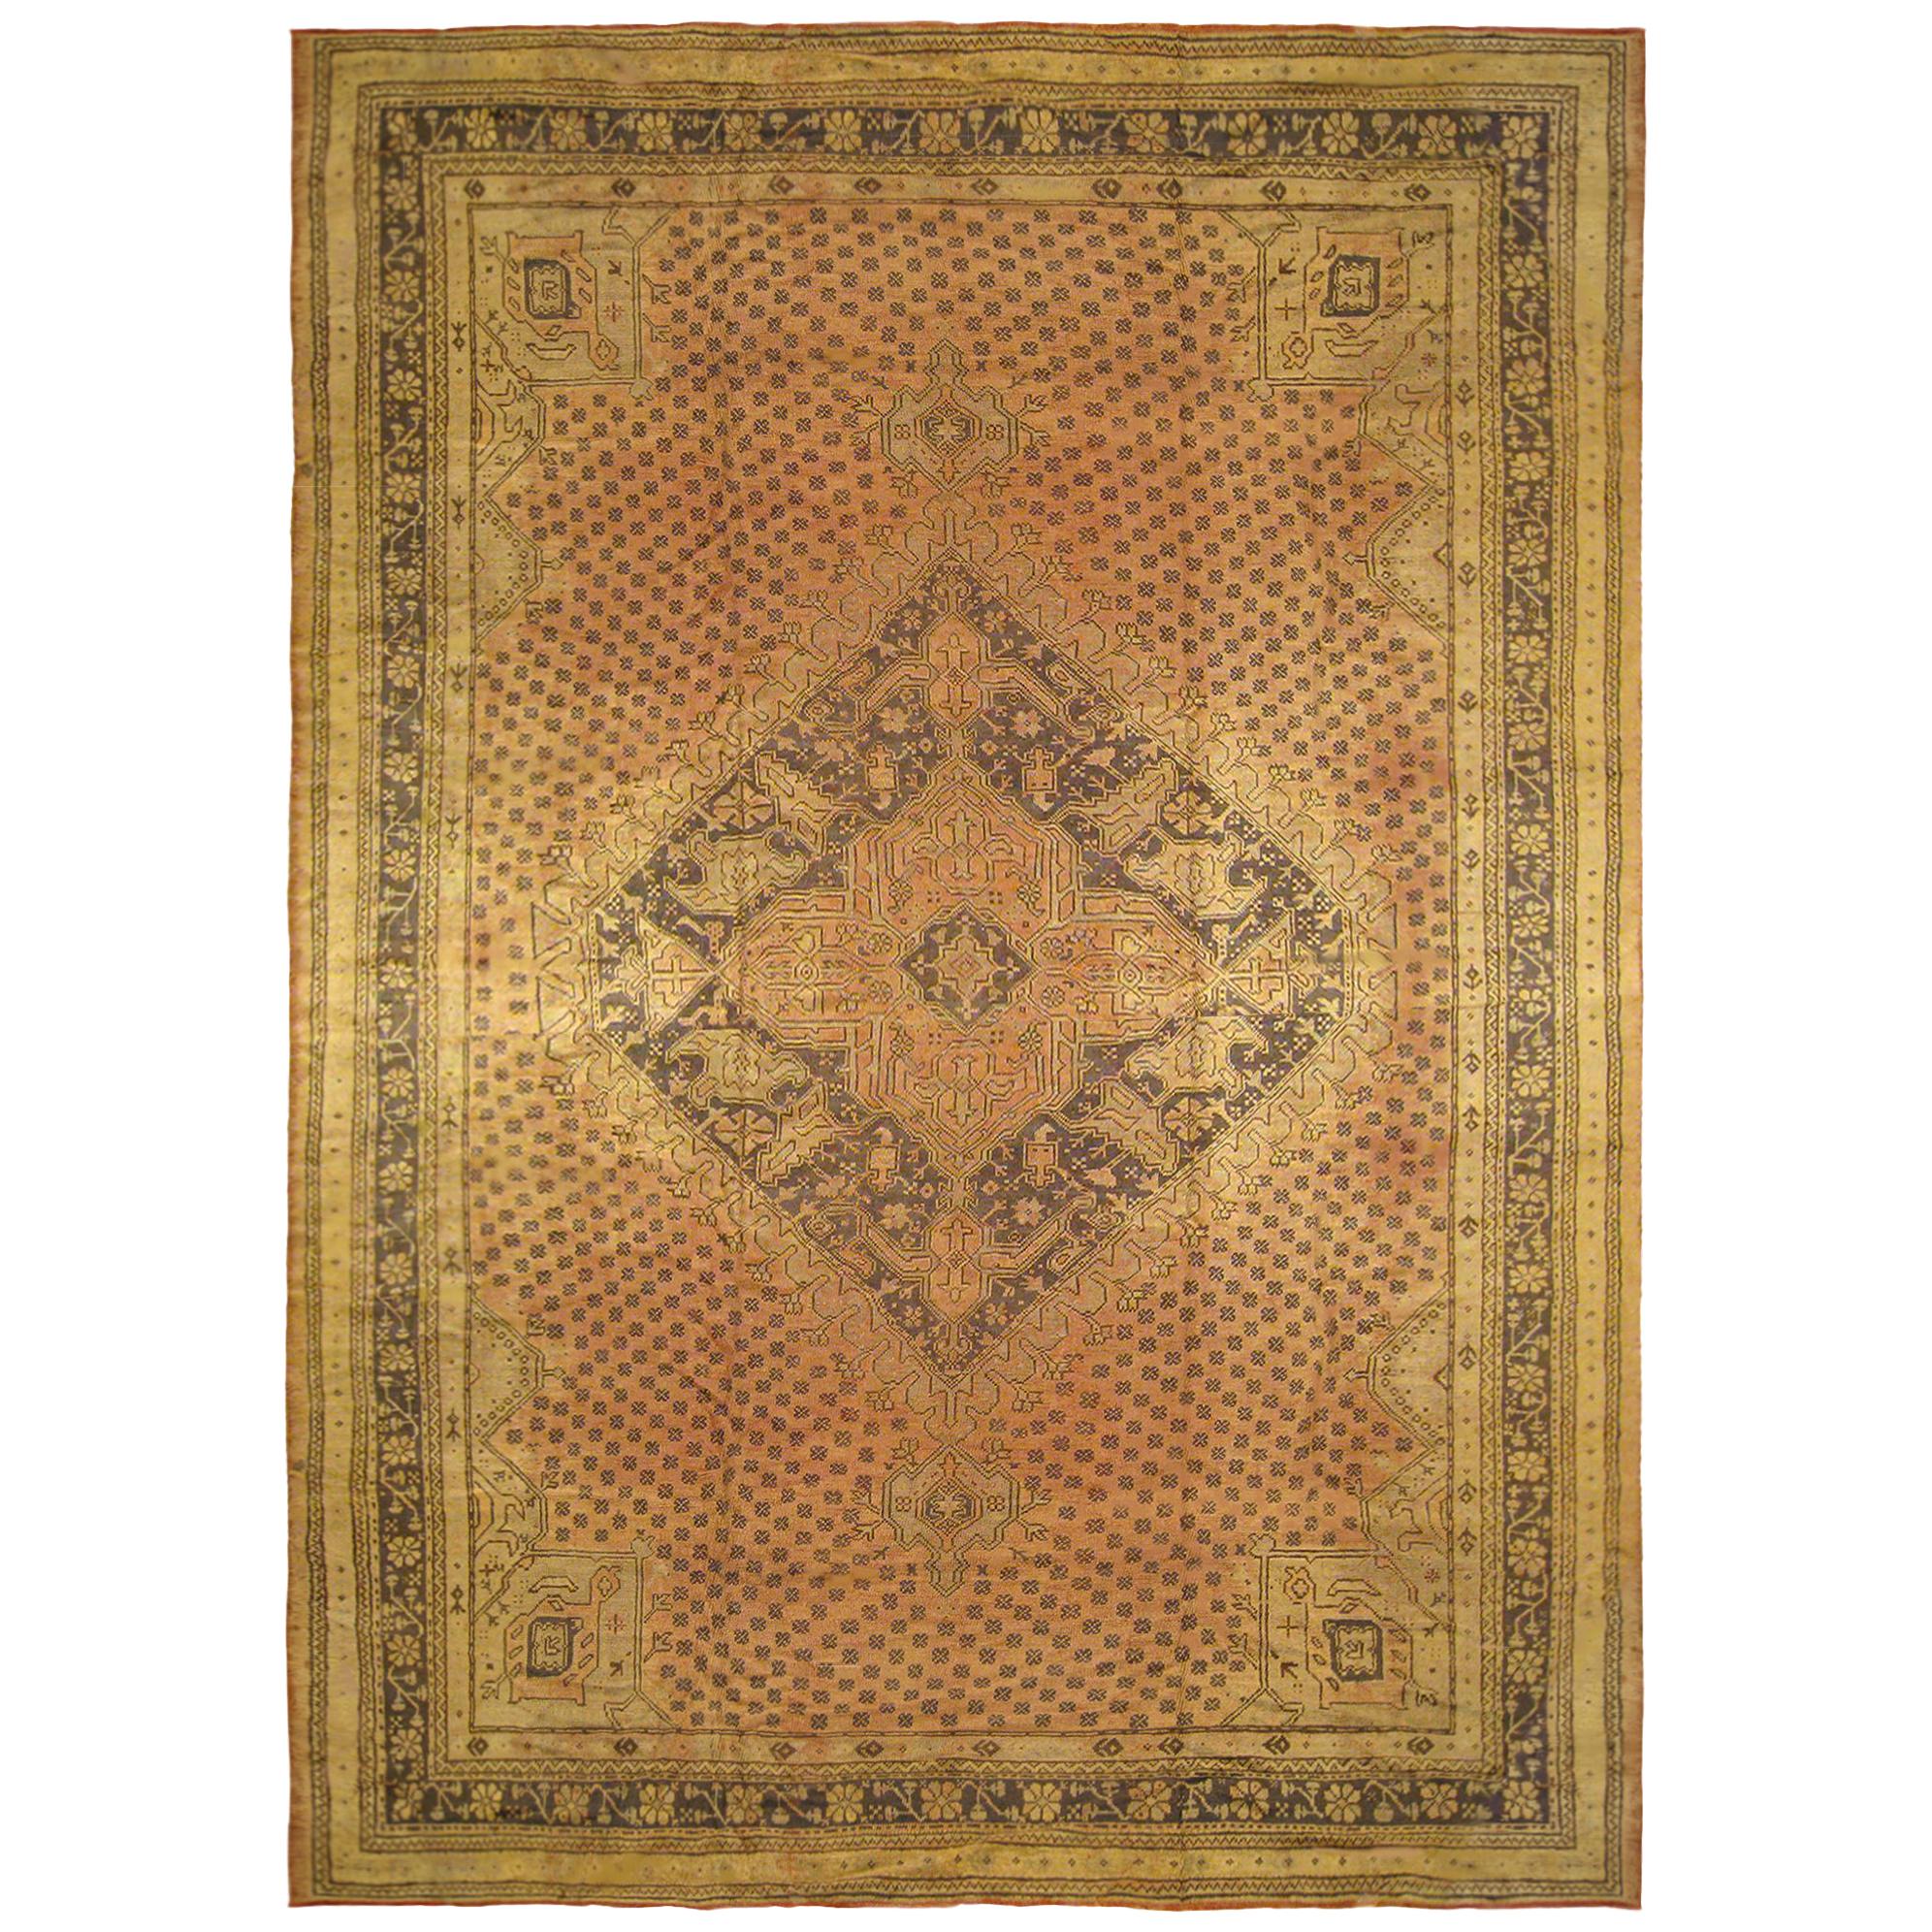 Vintage Turkish Oushak Rug, in Large Size, with Earth Tones in the Covered Field